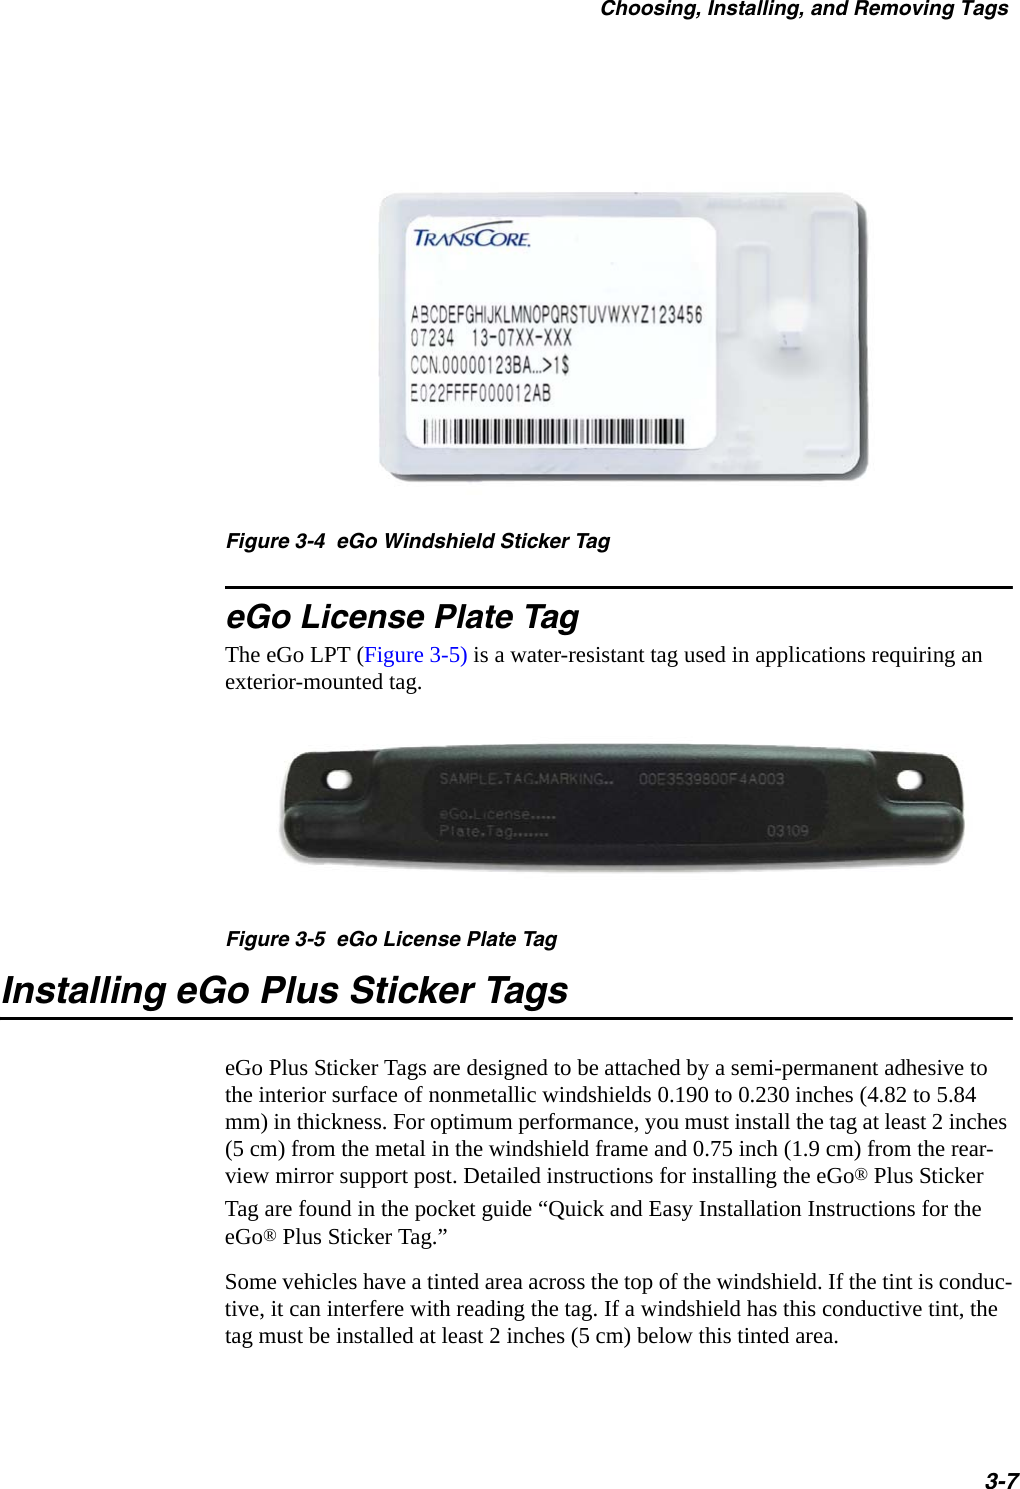 Choosing, Installing, and Removing Tags3-7 Figure 3-4  eGo Windshield Sticker TageGo License Plate TagThe eGo LPT (Figure 3-5) is a water-resistant tag used in applications requiring an exterior-mounted tag.Figure 3-5  eGo License Plate TagInstalling eGo Plus Sticker TagseGo Plus Sticker Tags are designed to be attached by a semi-permanent adhesive to the interior surface of nonmetallic windshields 0.190 to 0.230 inches (4.82 to 5.84 mm) in thickness. For optimum performance, you must install the tag at least 2 inches (5 cm) from the metal in the windshield frame and 0.75 inch (1.9 cm) from the rear-view mirror support post. Detailed instructions for installing the eGo® Plus Sticker Tag are found in the pocket guide “Quick and Easy Installation Instructions for the eGo® Plus Sticker Tag.”Some vehicles have a tinted area across the top of the windshield. If the tint is conduc-tive, it can interfere with reading the tag. If a windshield has this conductive tint, the tag must be installed at least 2 inches (5 cm) below this tinted area.